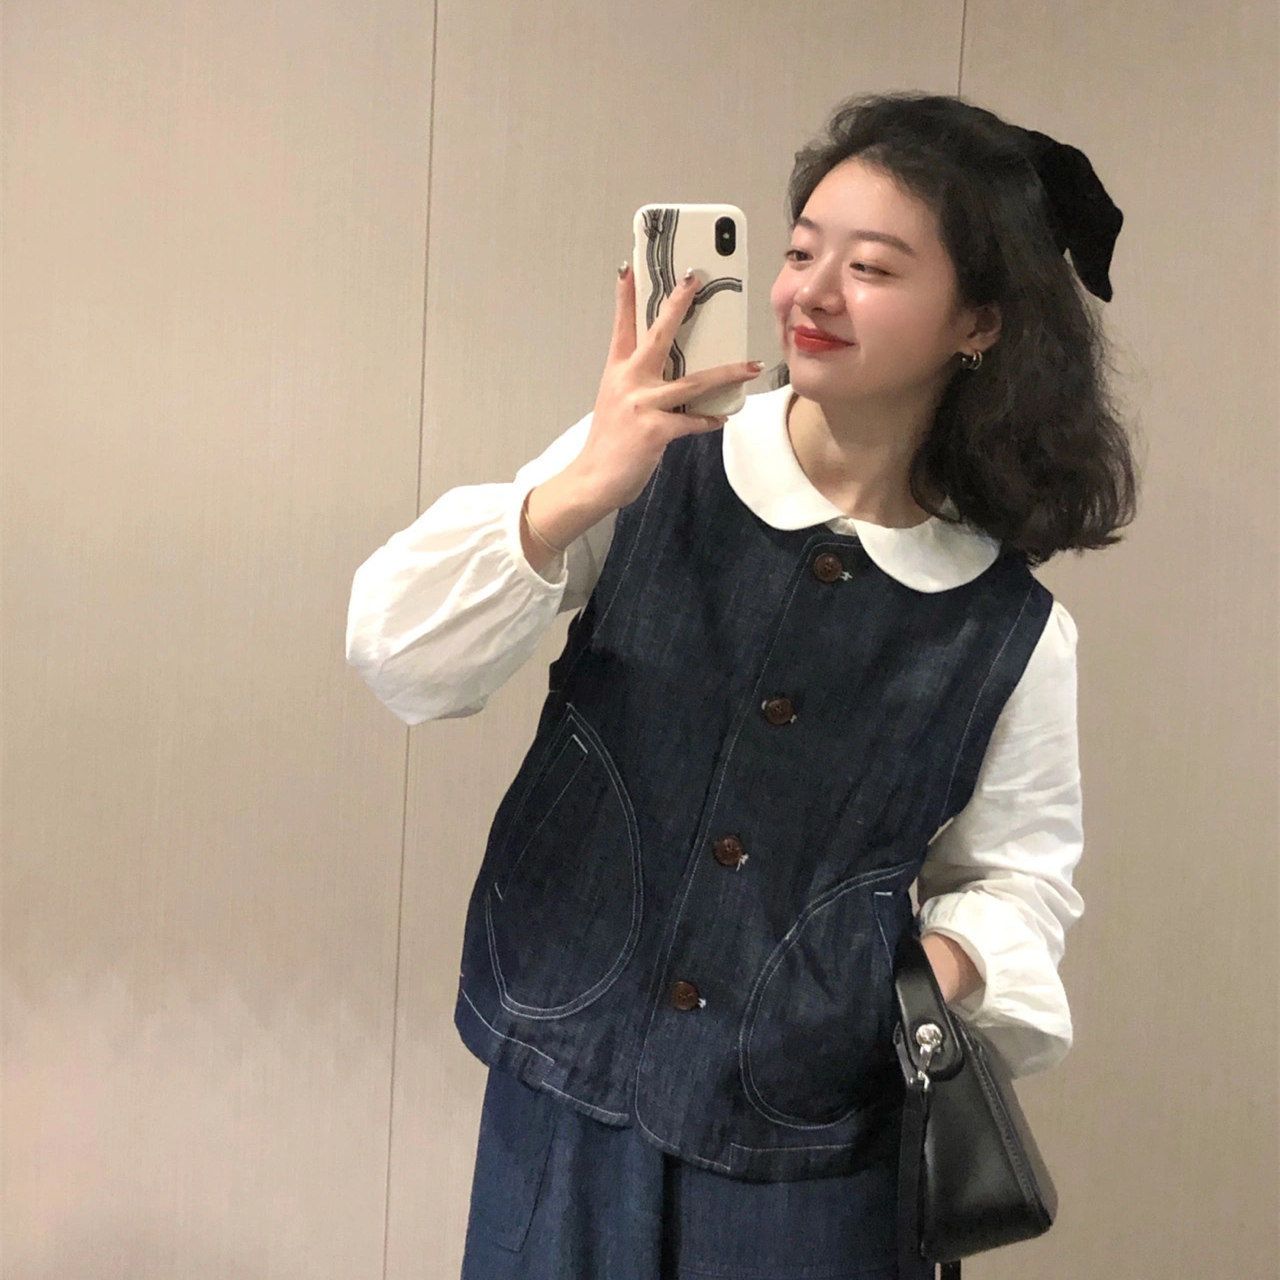 Three-piece suit/one-piece spring and autumn literary retro denim vest top + doll collar shirt + belly-covering skirt